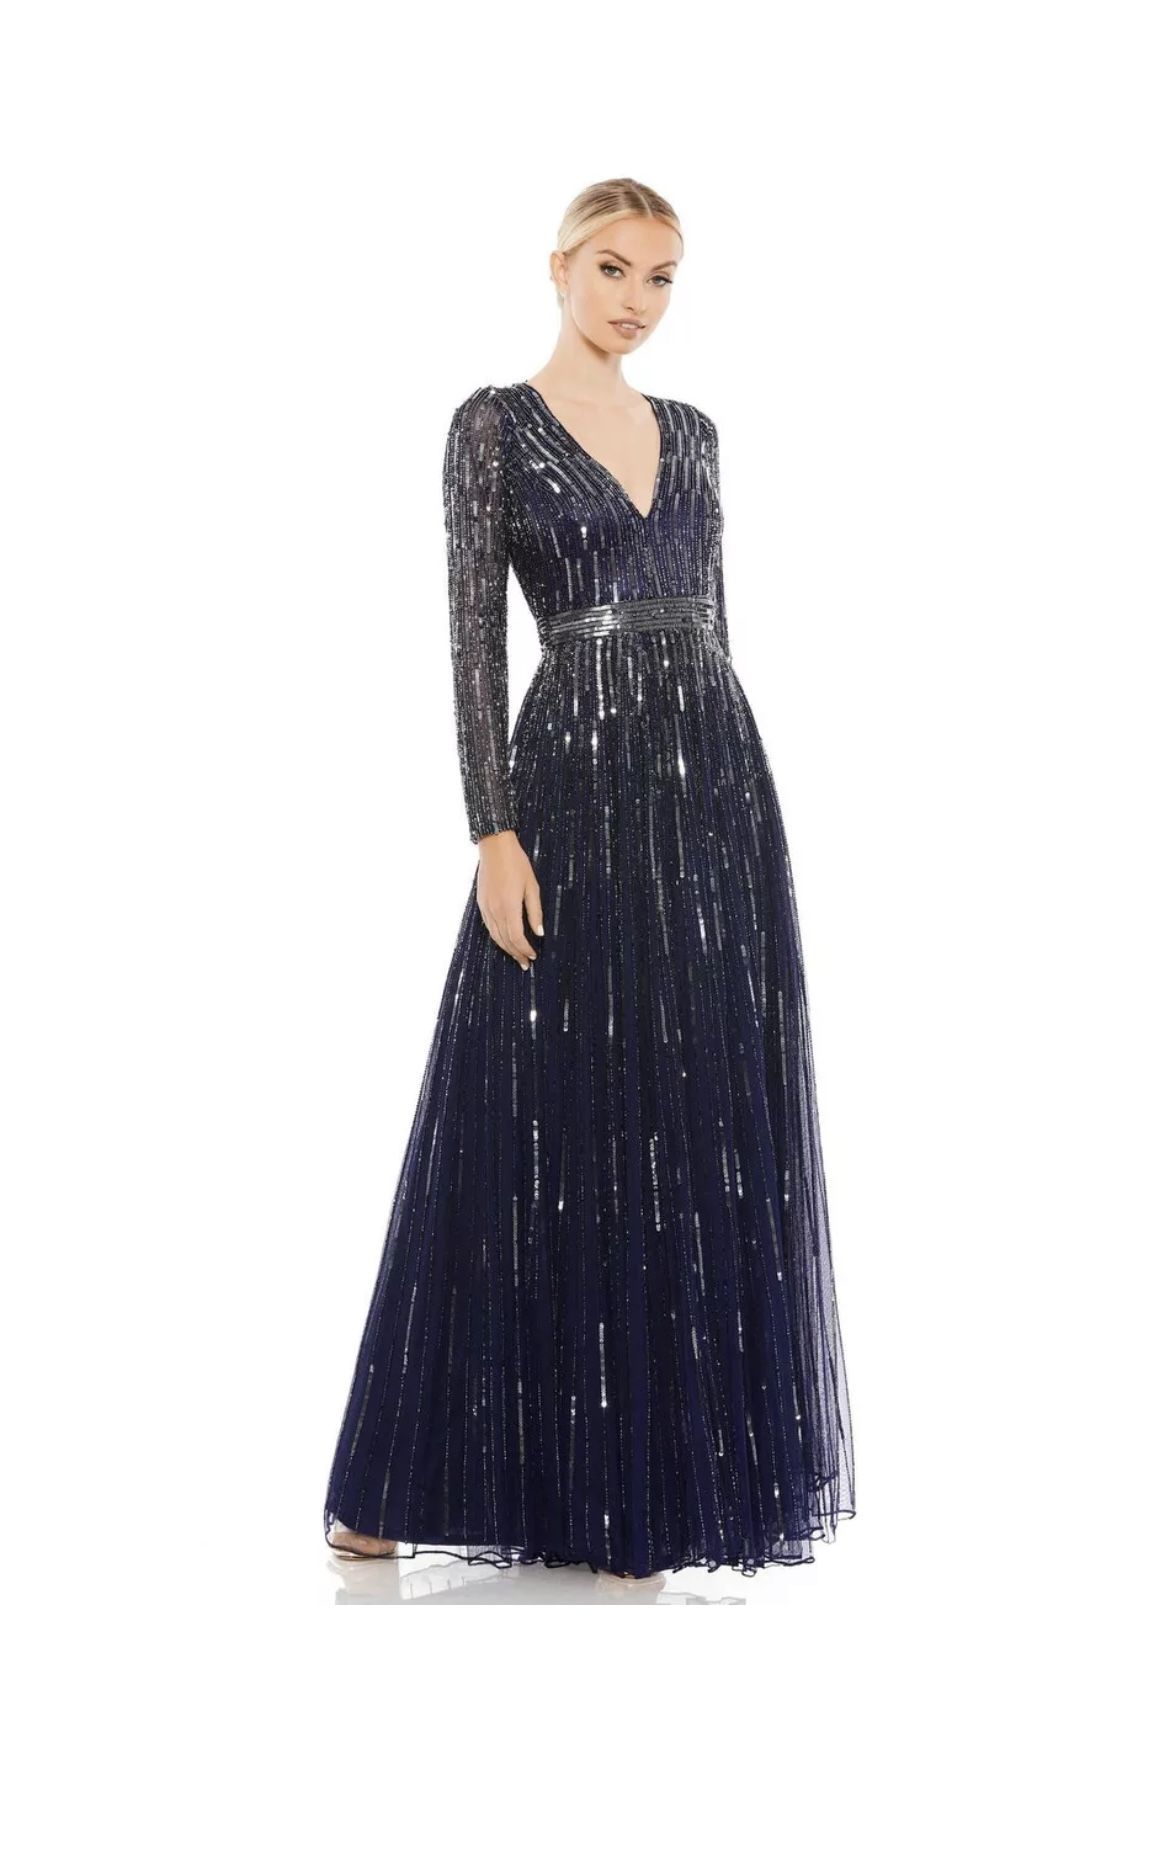 New Mac Duggal 4977 Sequin Illusion Sleeves V-Neck Midnight A-Line Gown 14